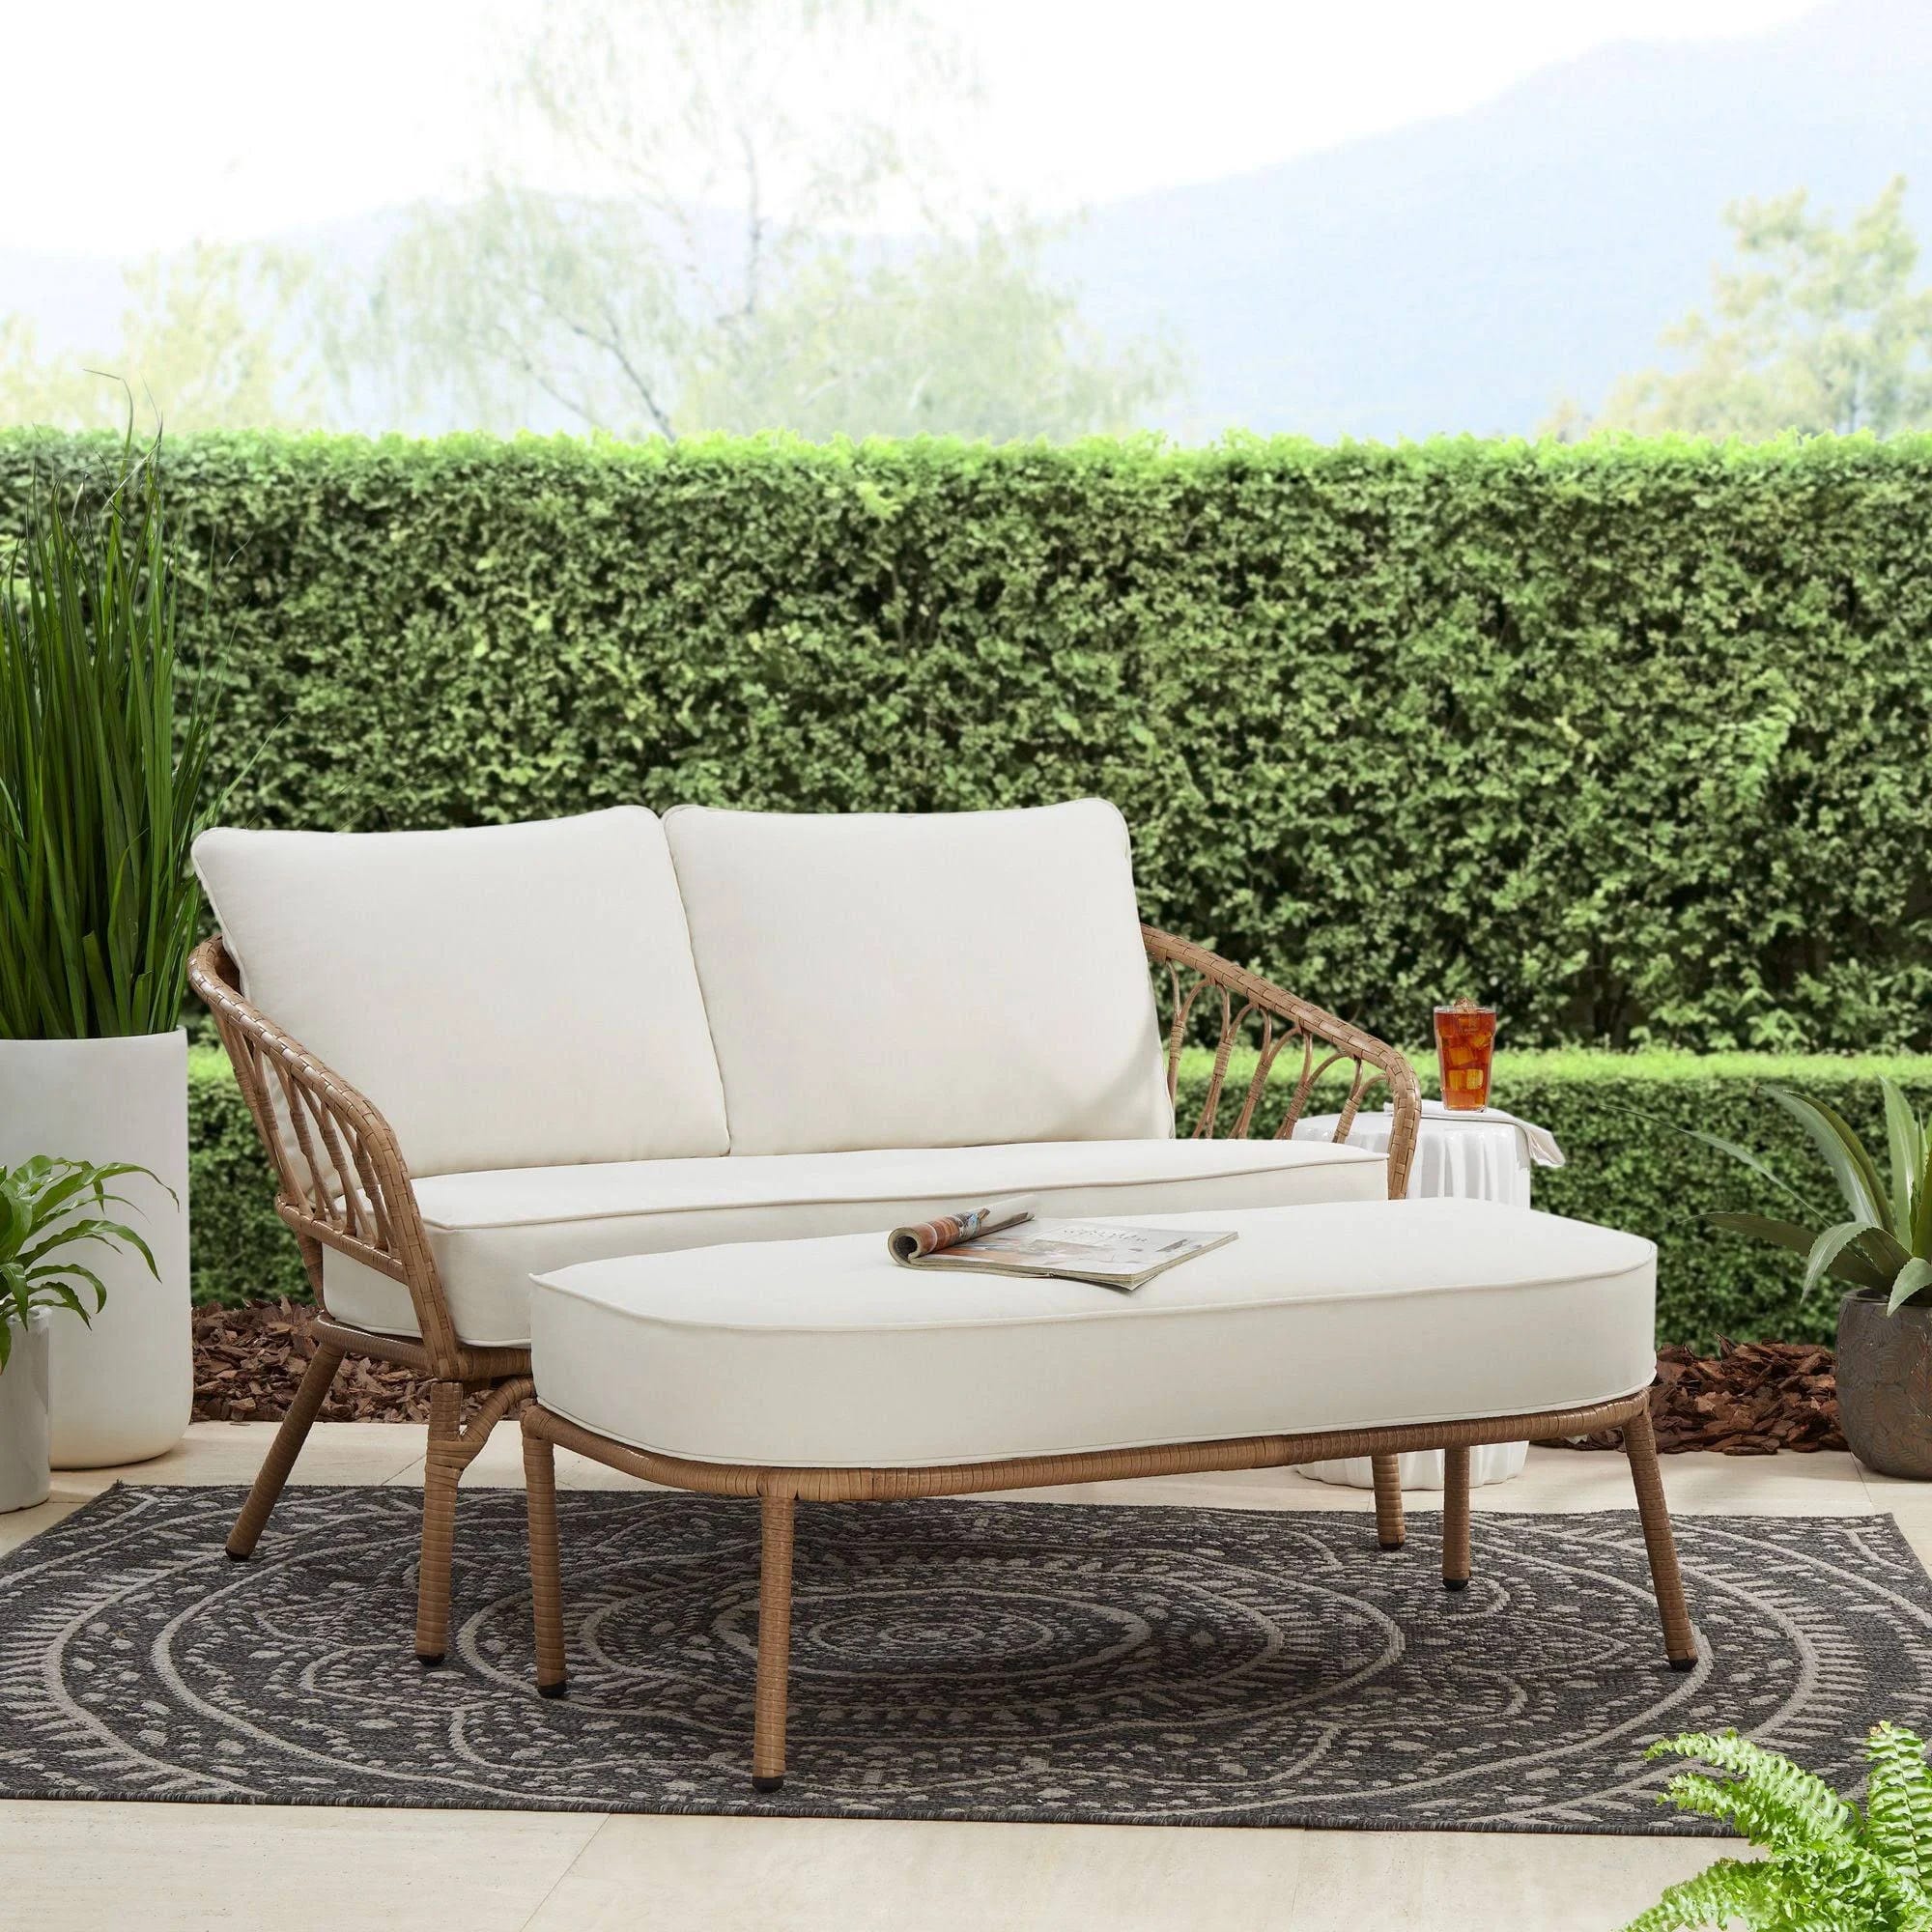 Better Homes & Gardens All-Weather Wicker Sage Loveseat and Ottoman Set | Image